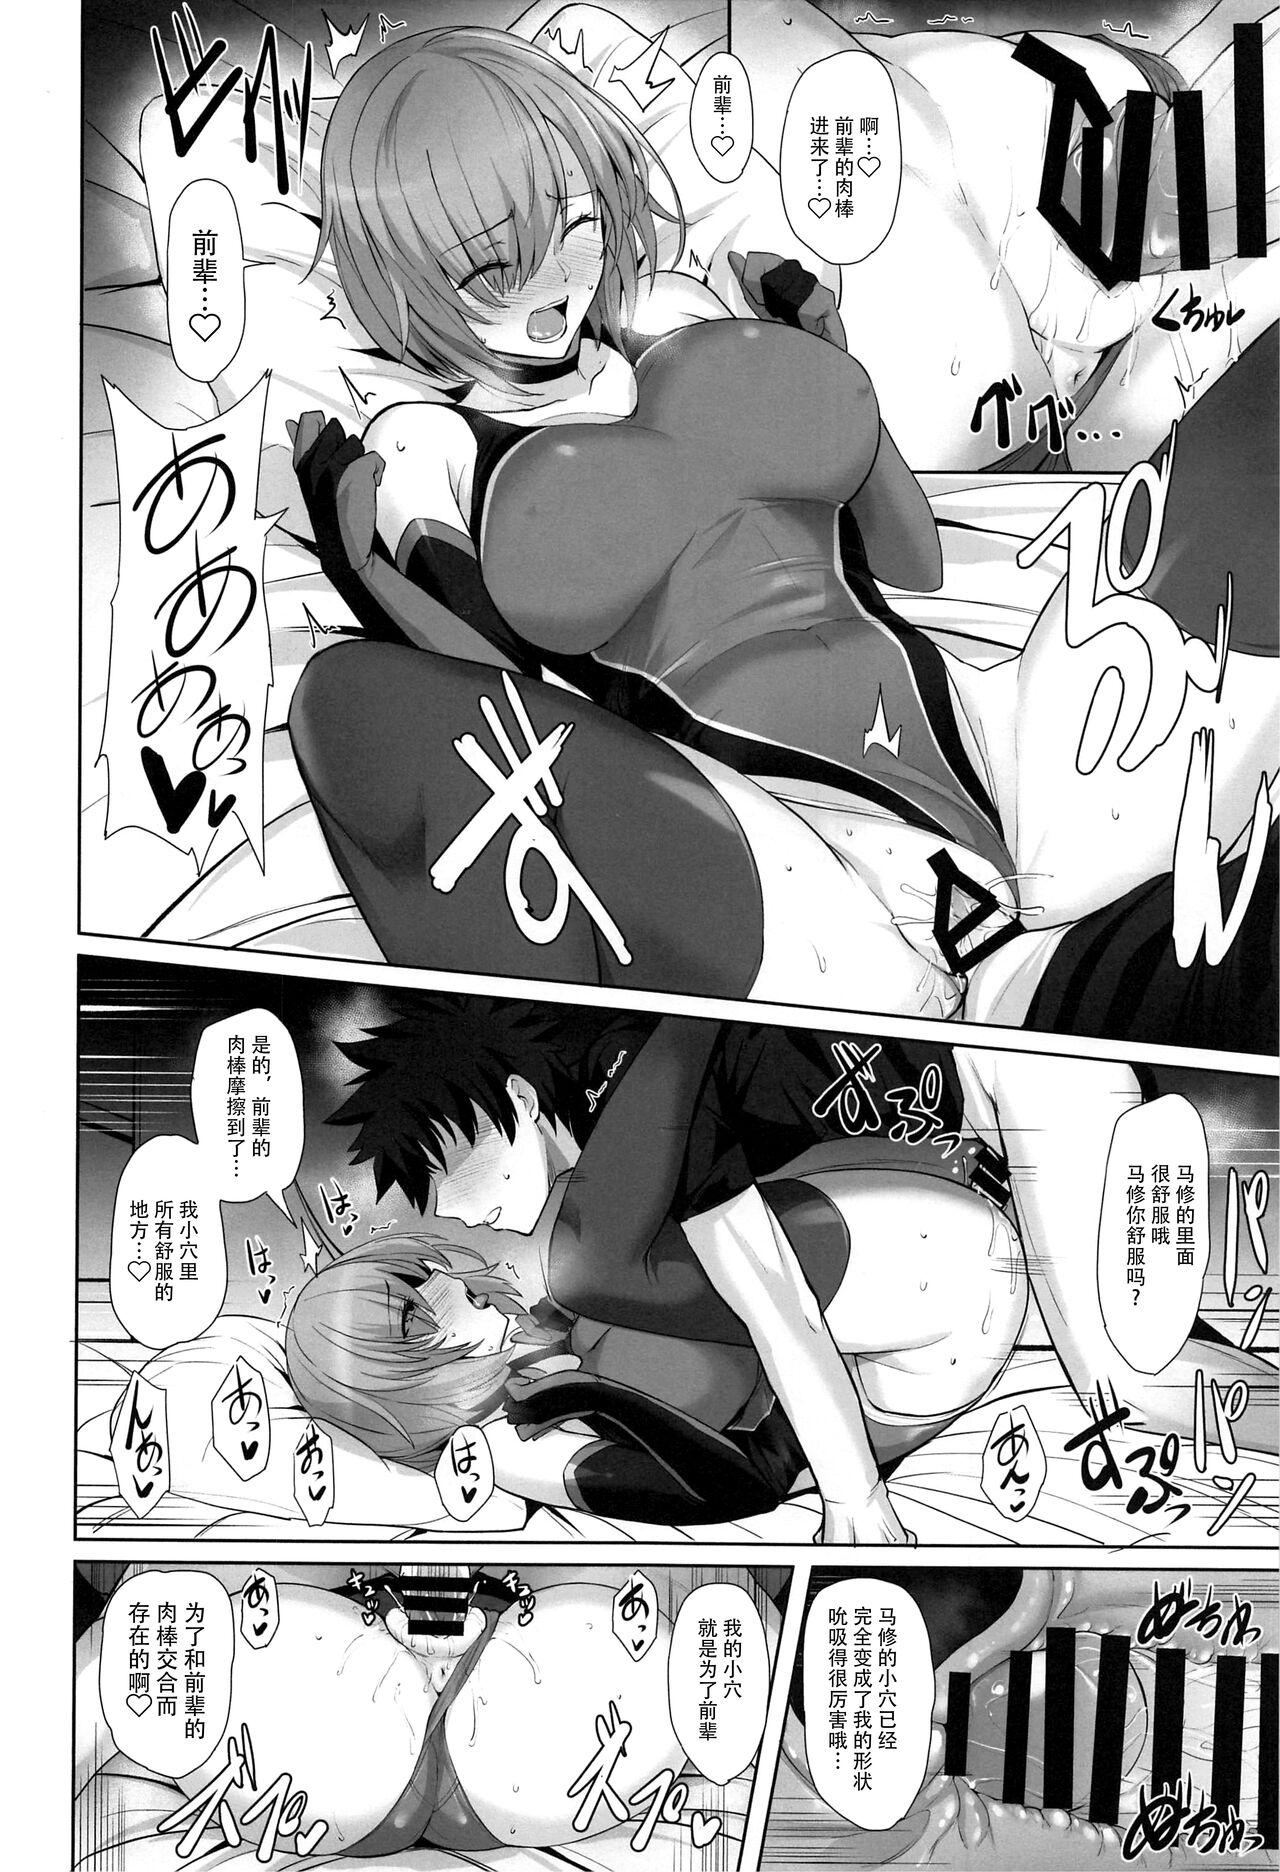 Maid Kyouei Tokusei no Servant to 2 - Fate grand order Livesex - Page 9